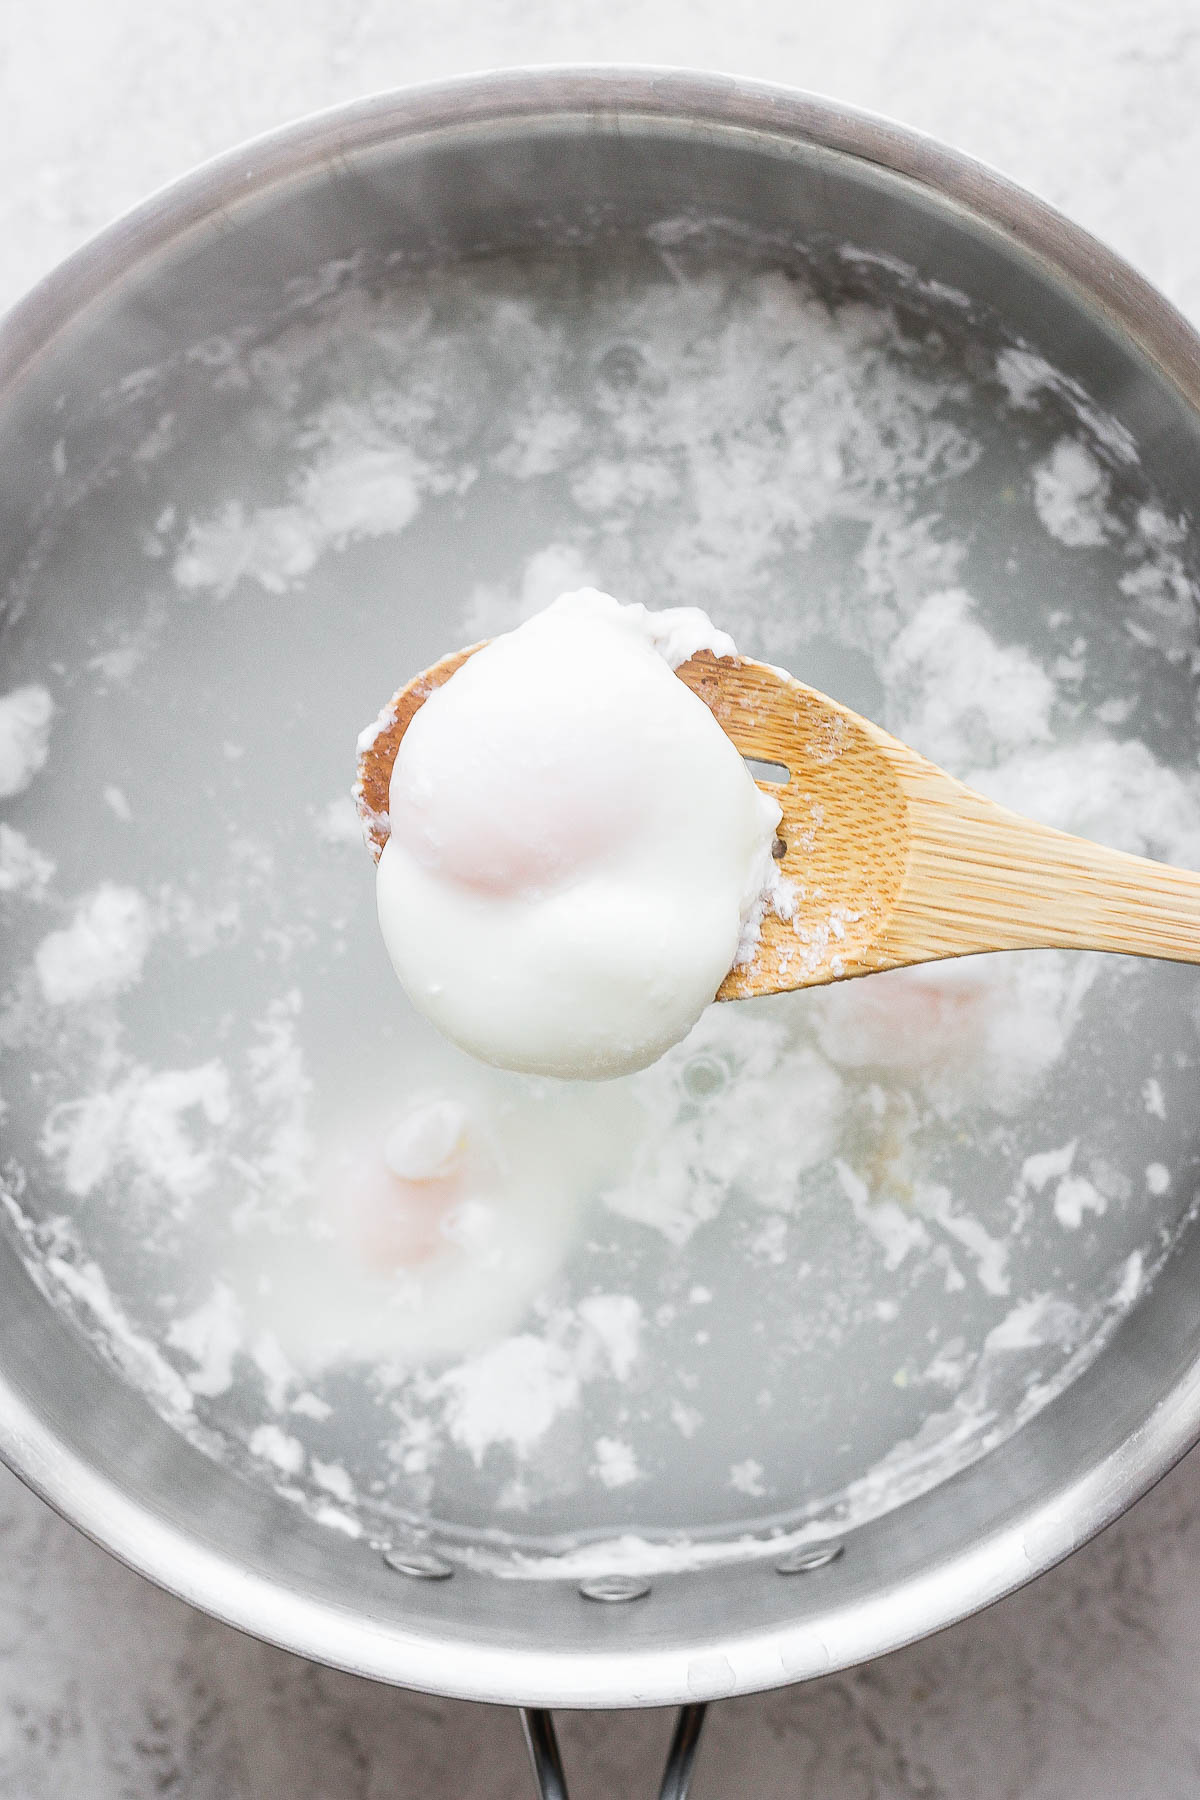 A slotted spoon scooping a poached egg out of the hot water.